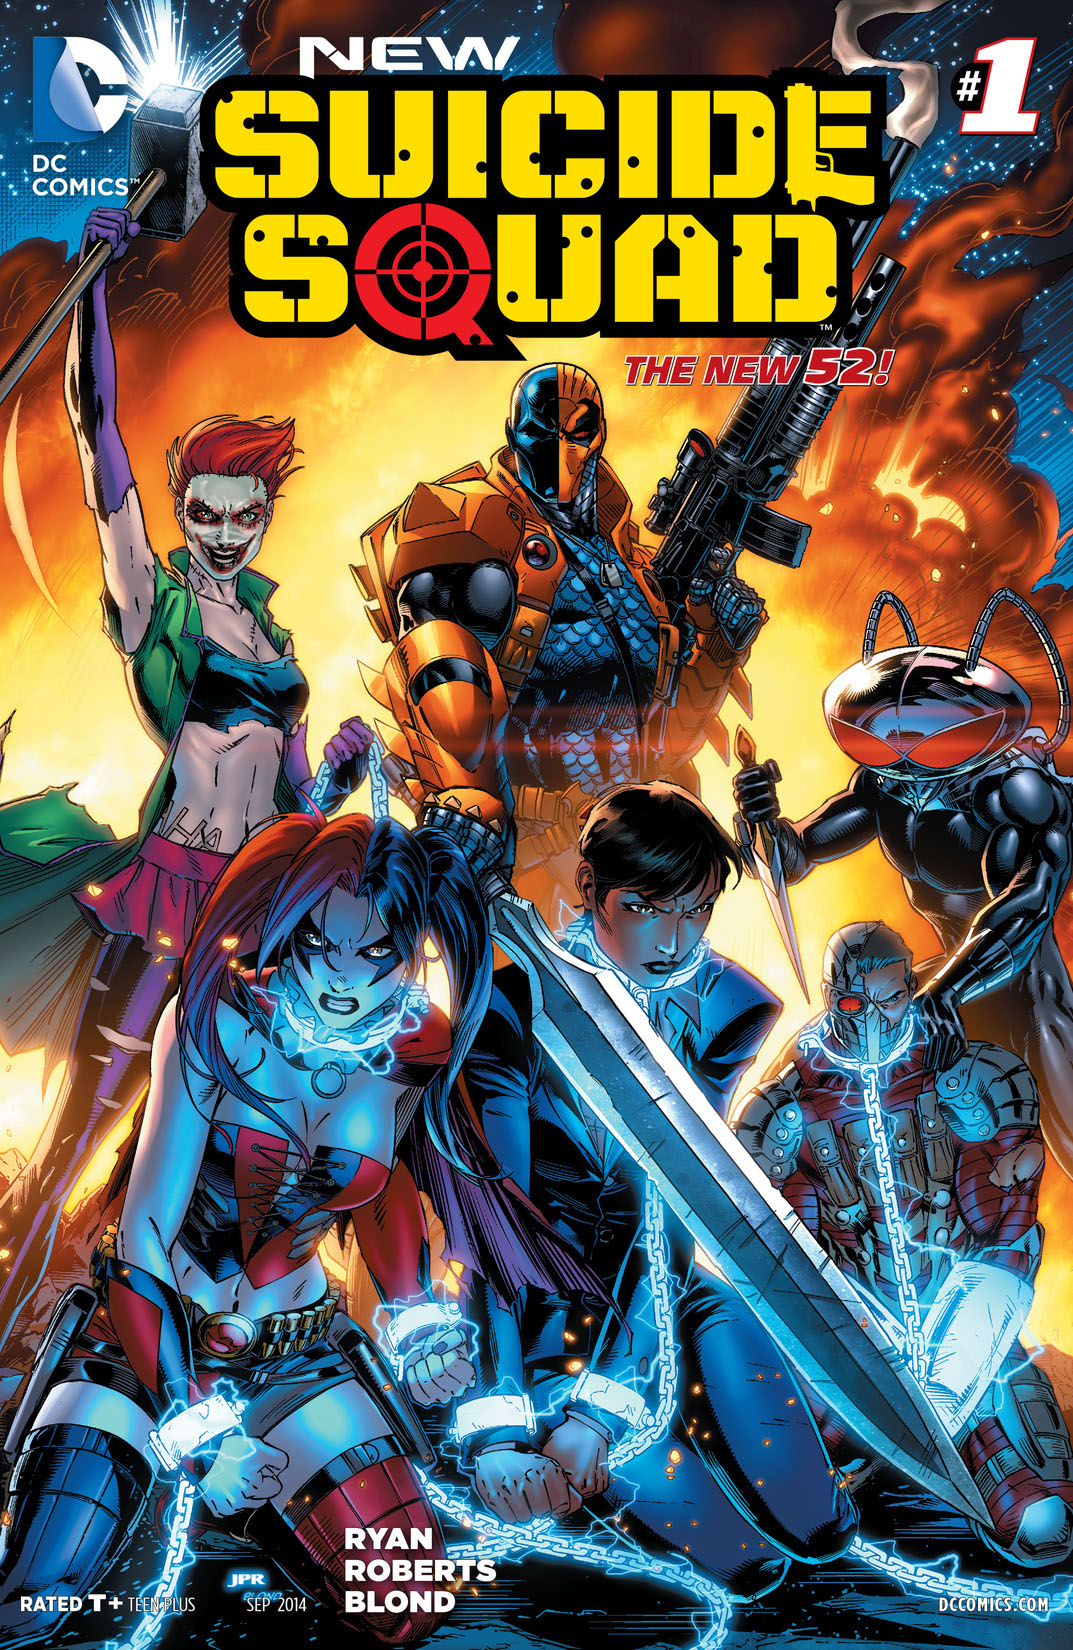 New Suicide Squad #1 preview images